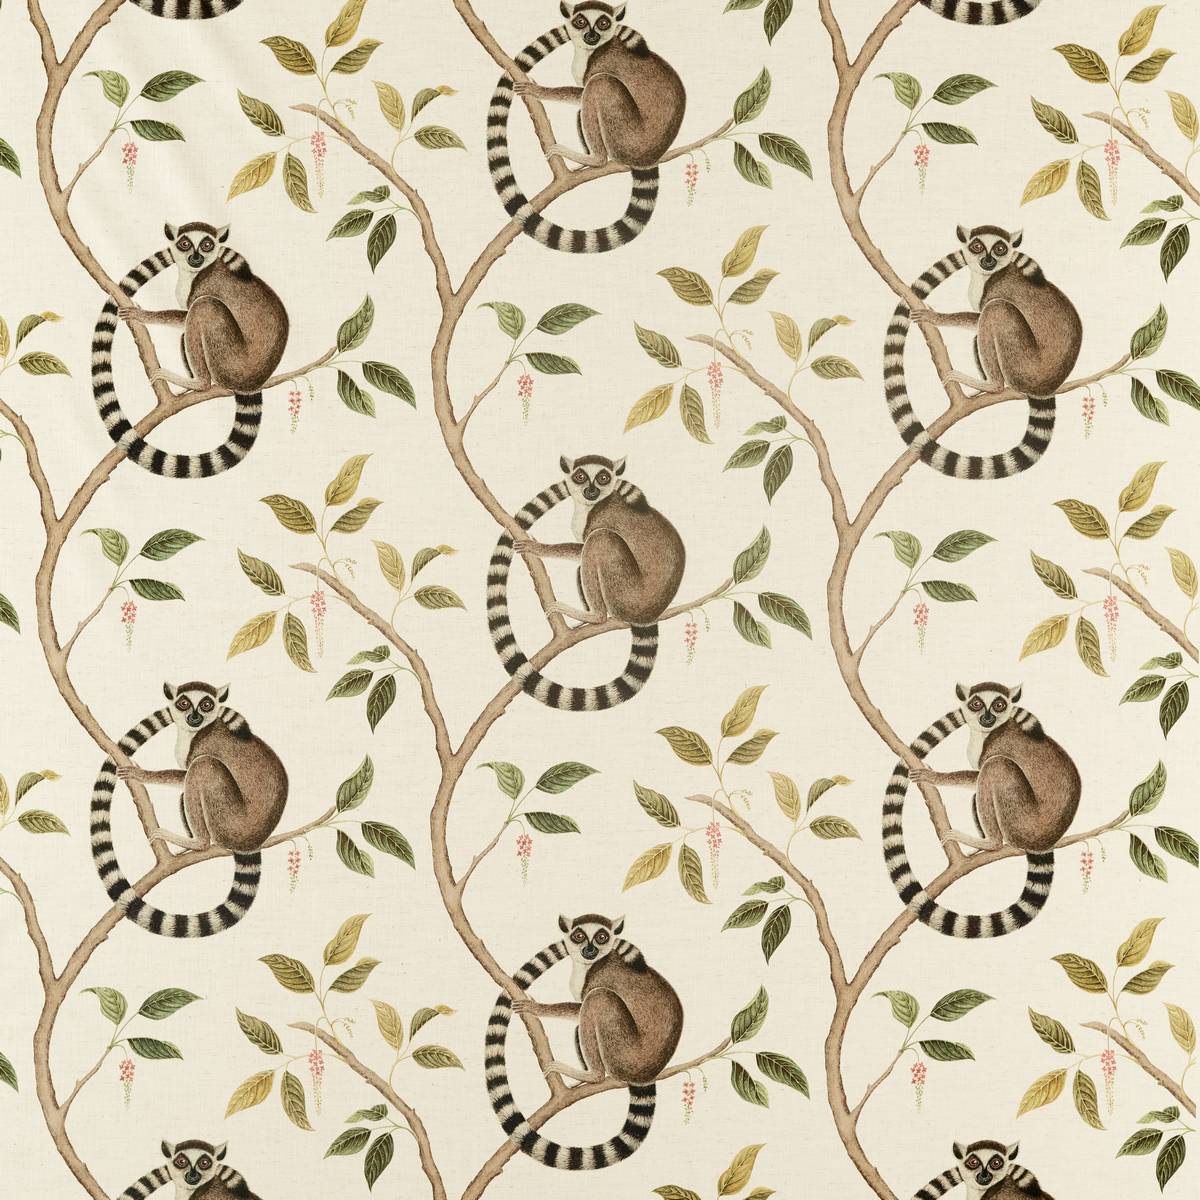 Ringtailed Lemur Olive Fabric by Sanderson